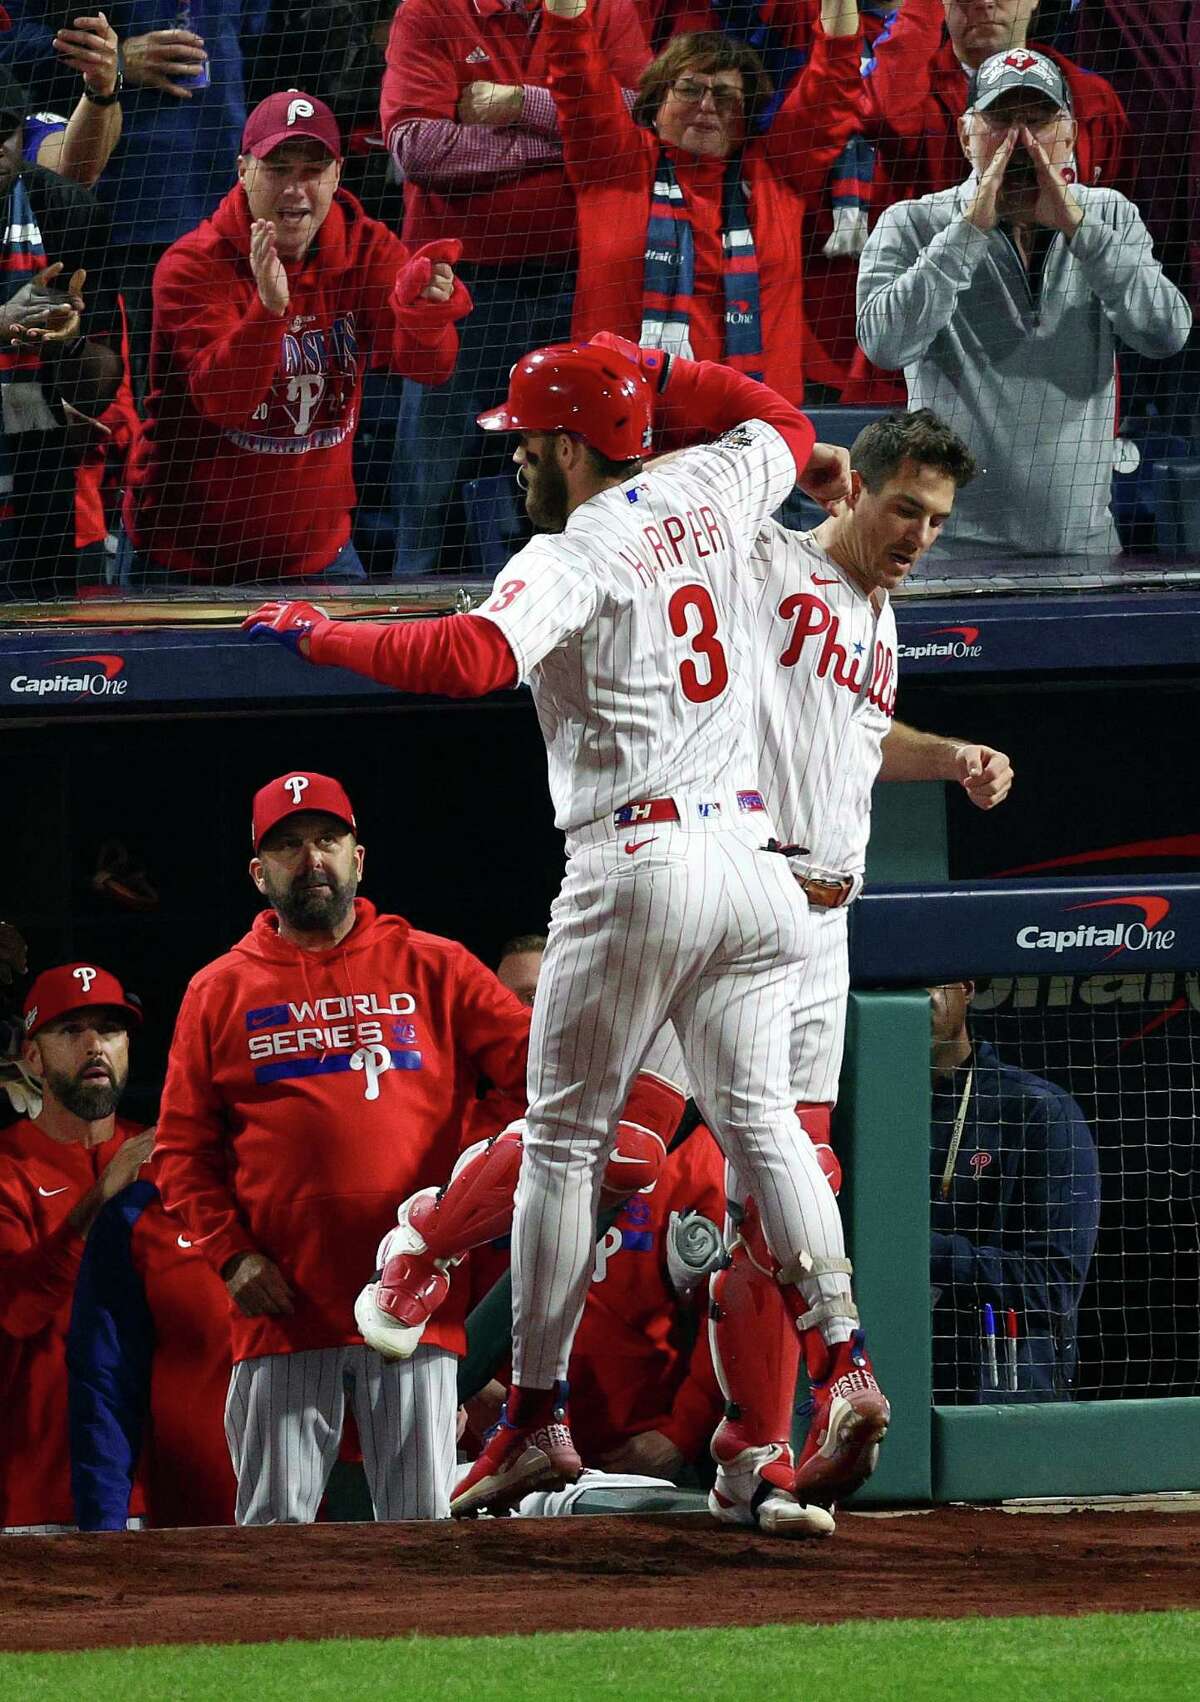 Phillies tie World Series mark with five home runs in Game 3 win